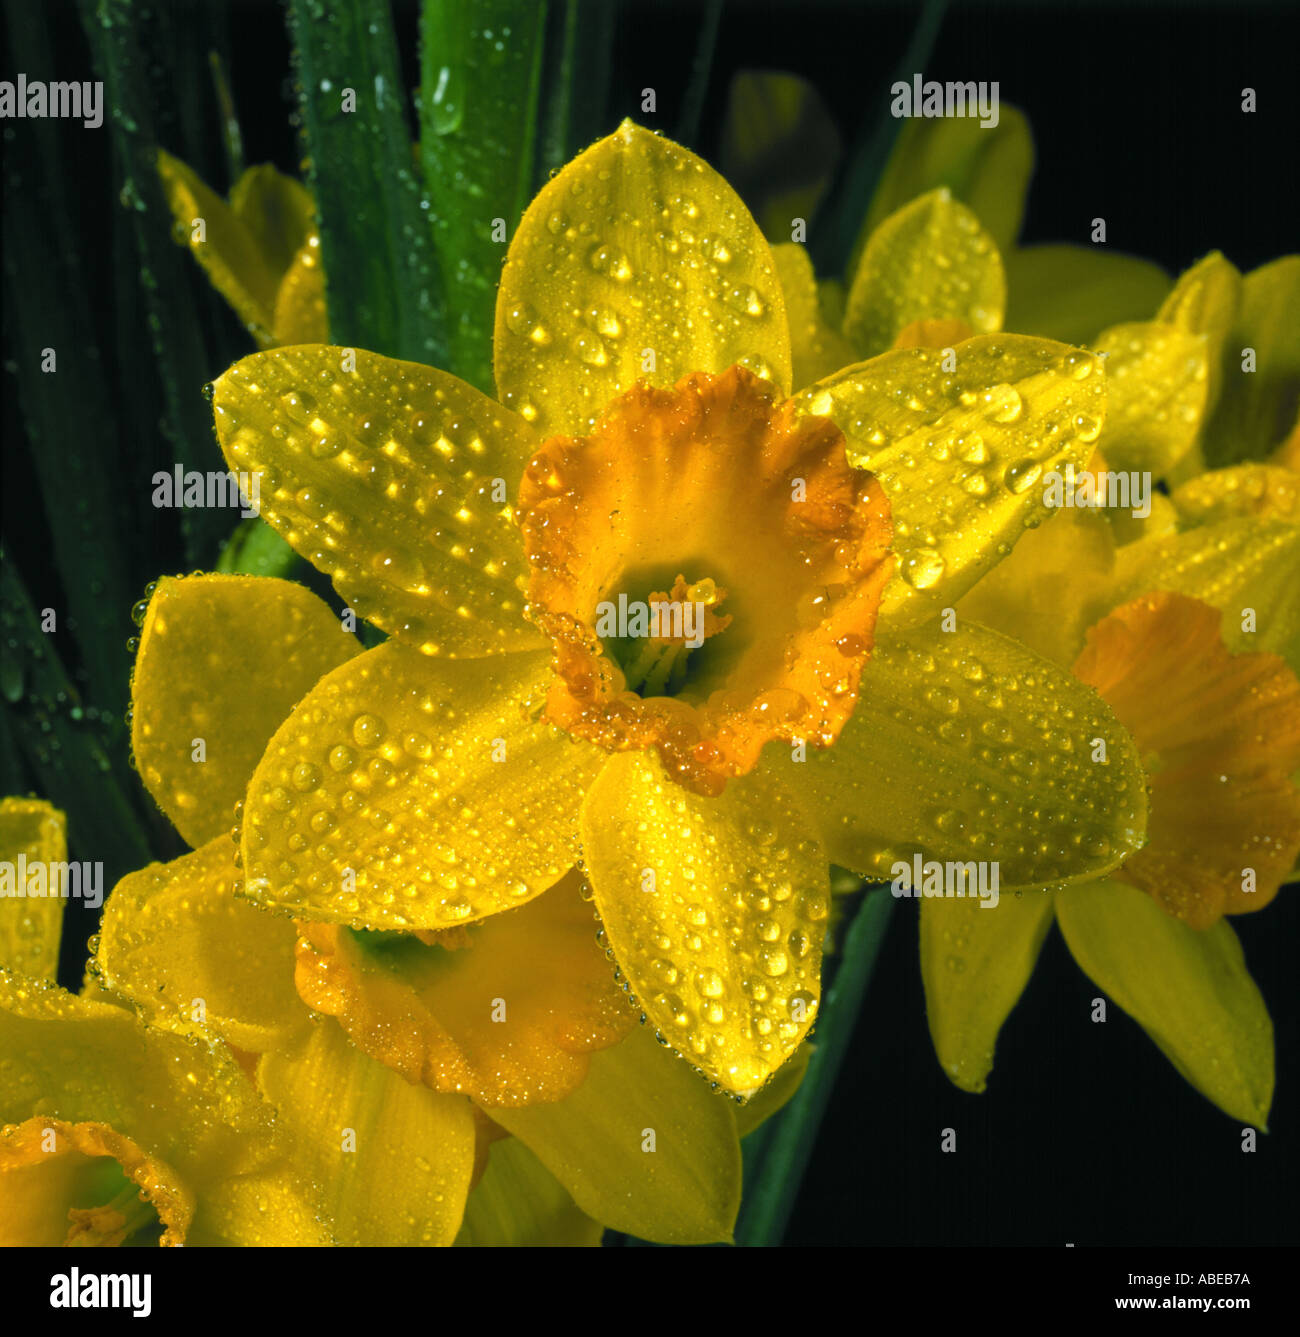 A daffodil flower Narcissus sp with water droplets Stock Photo